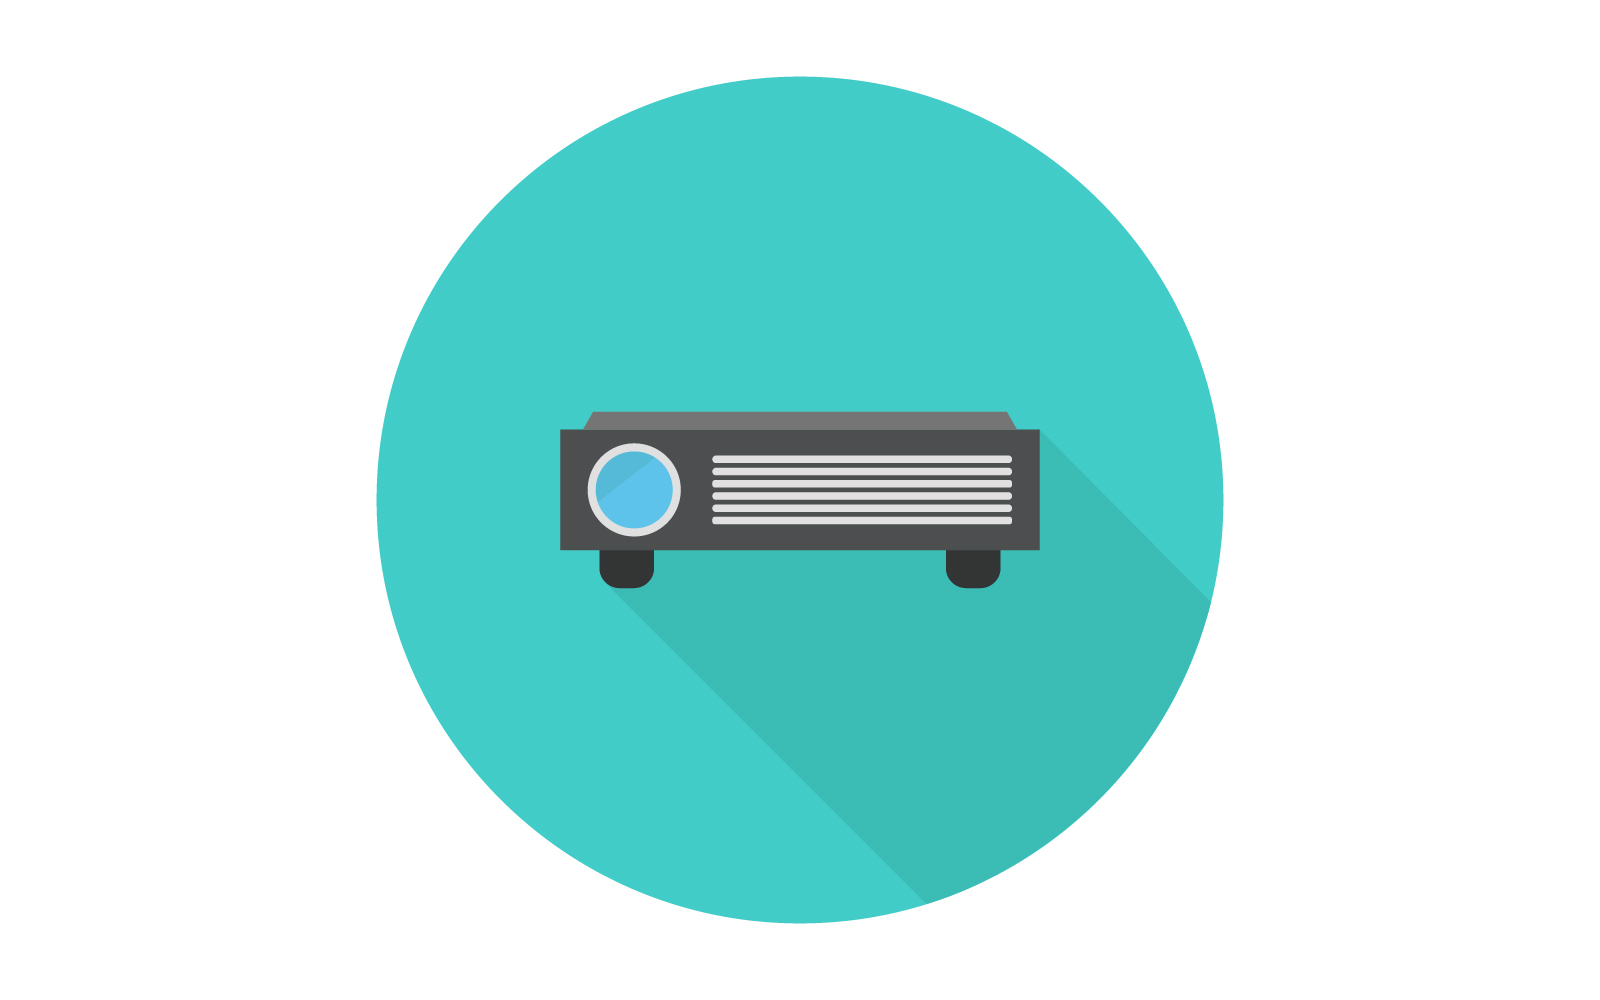 Projector on a white background illustrated in vector